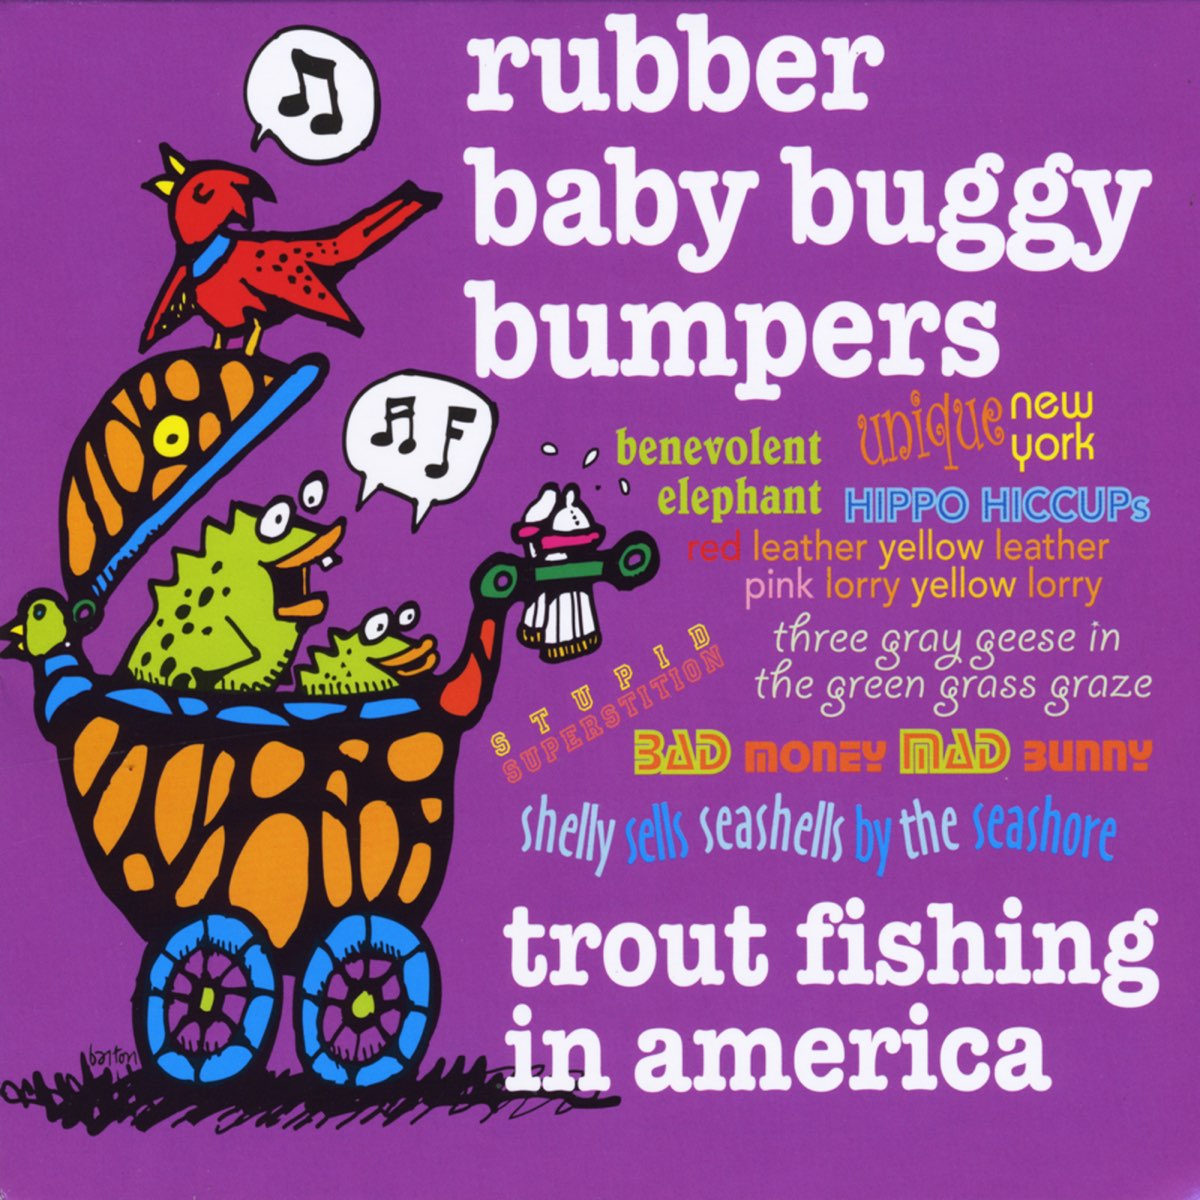 Rubber Baby Buggy Bumpers CD Trout Fishing in America Children's